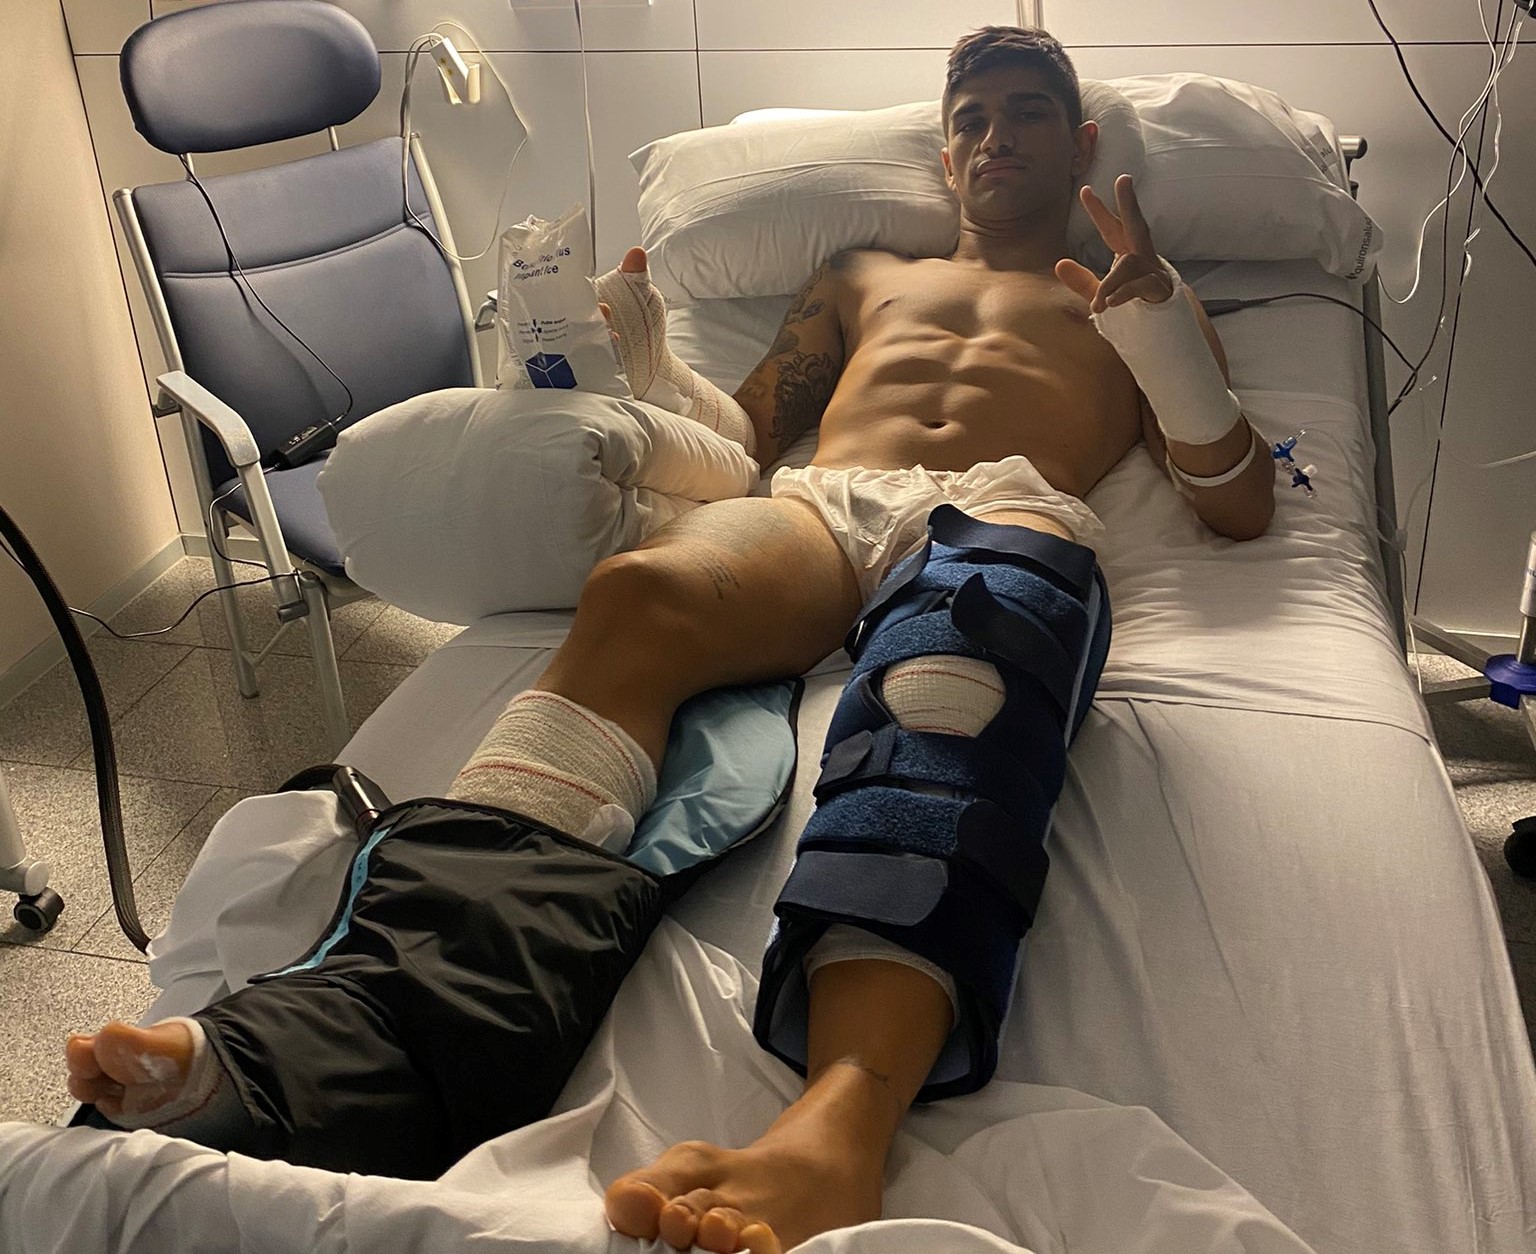 Jorge Martin making recovery after surgery